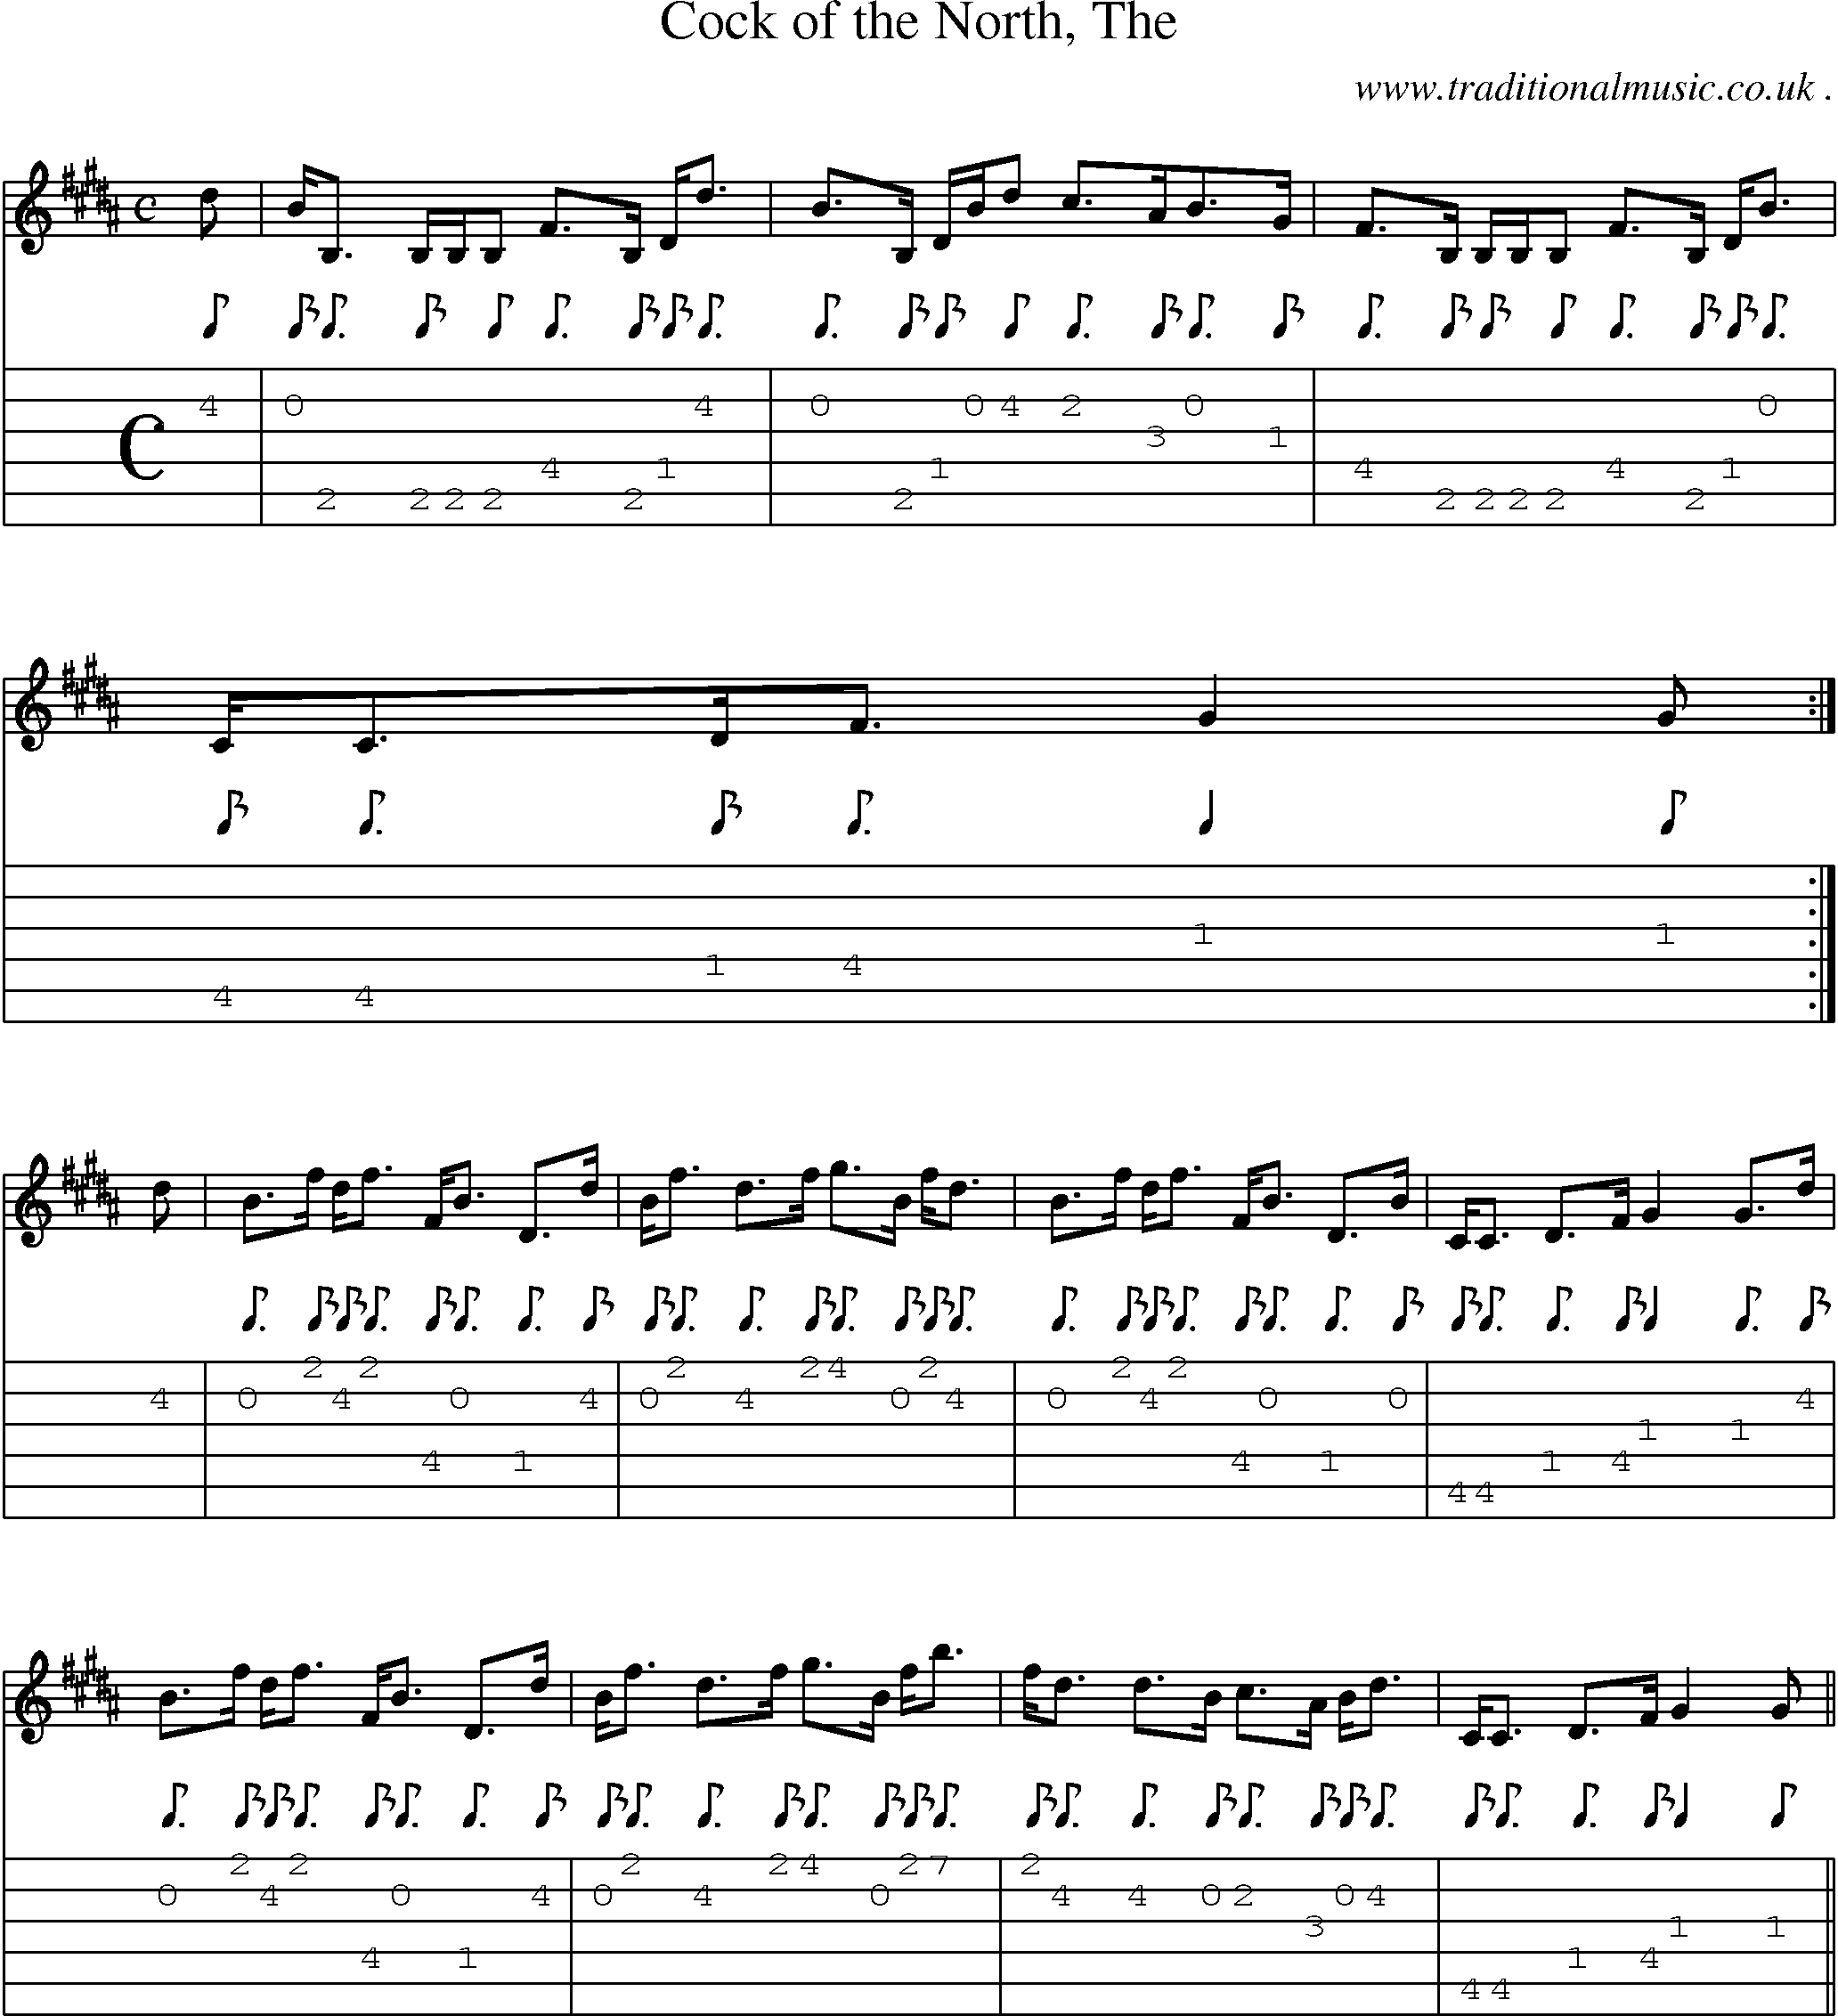 Sheet-music  score, Chords and Guitar Tabs for Cock Of The North The